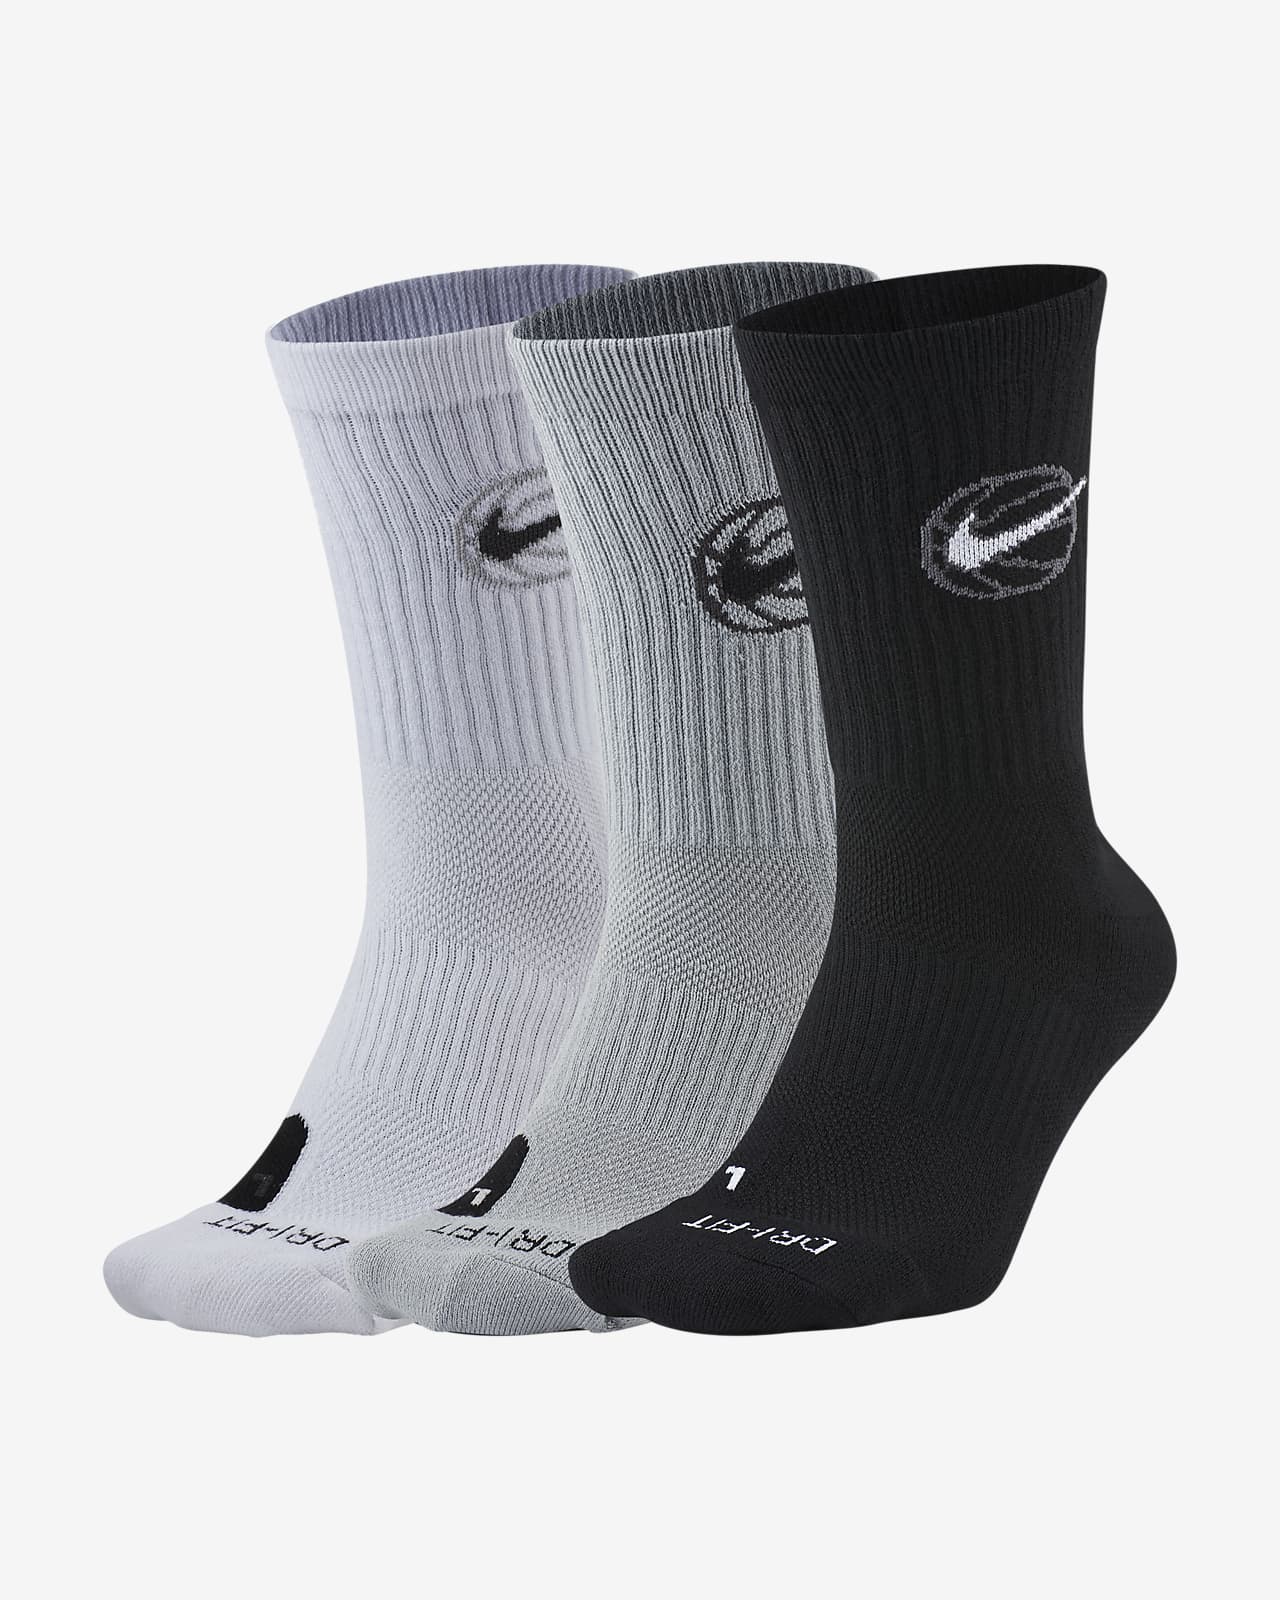 Chaussettes de basketball Nike Everyday Crew (3 paires). Nike LU